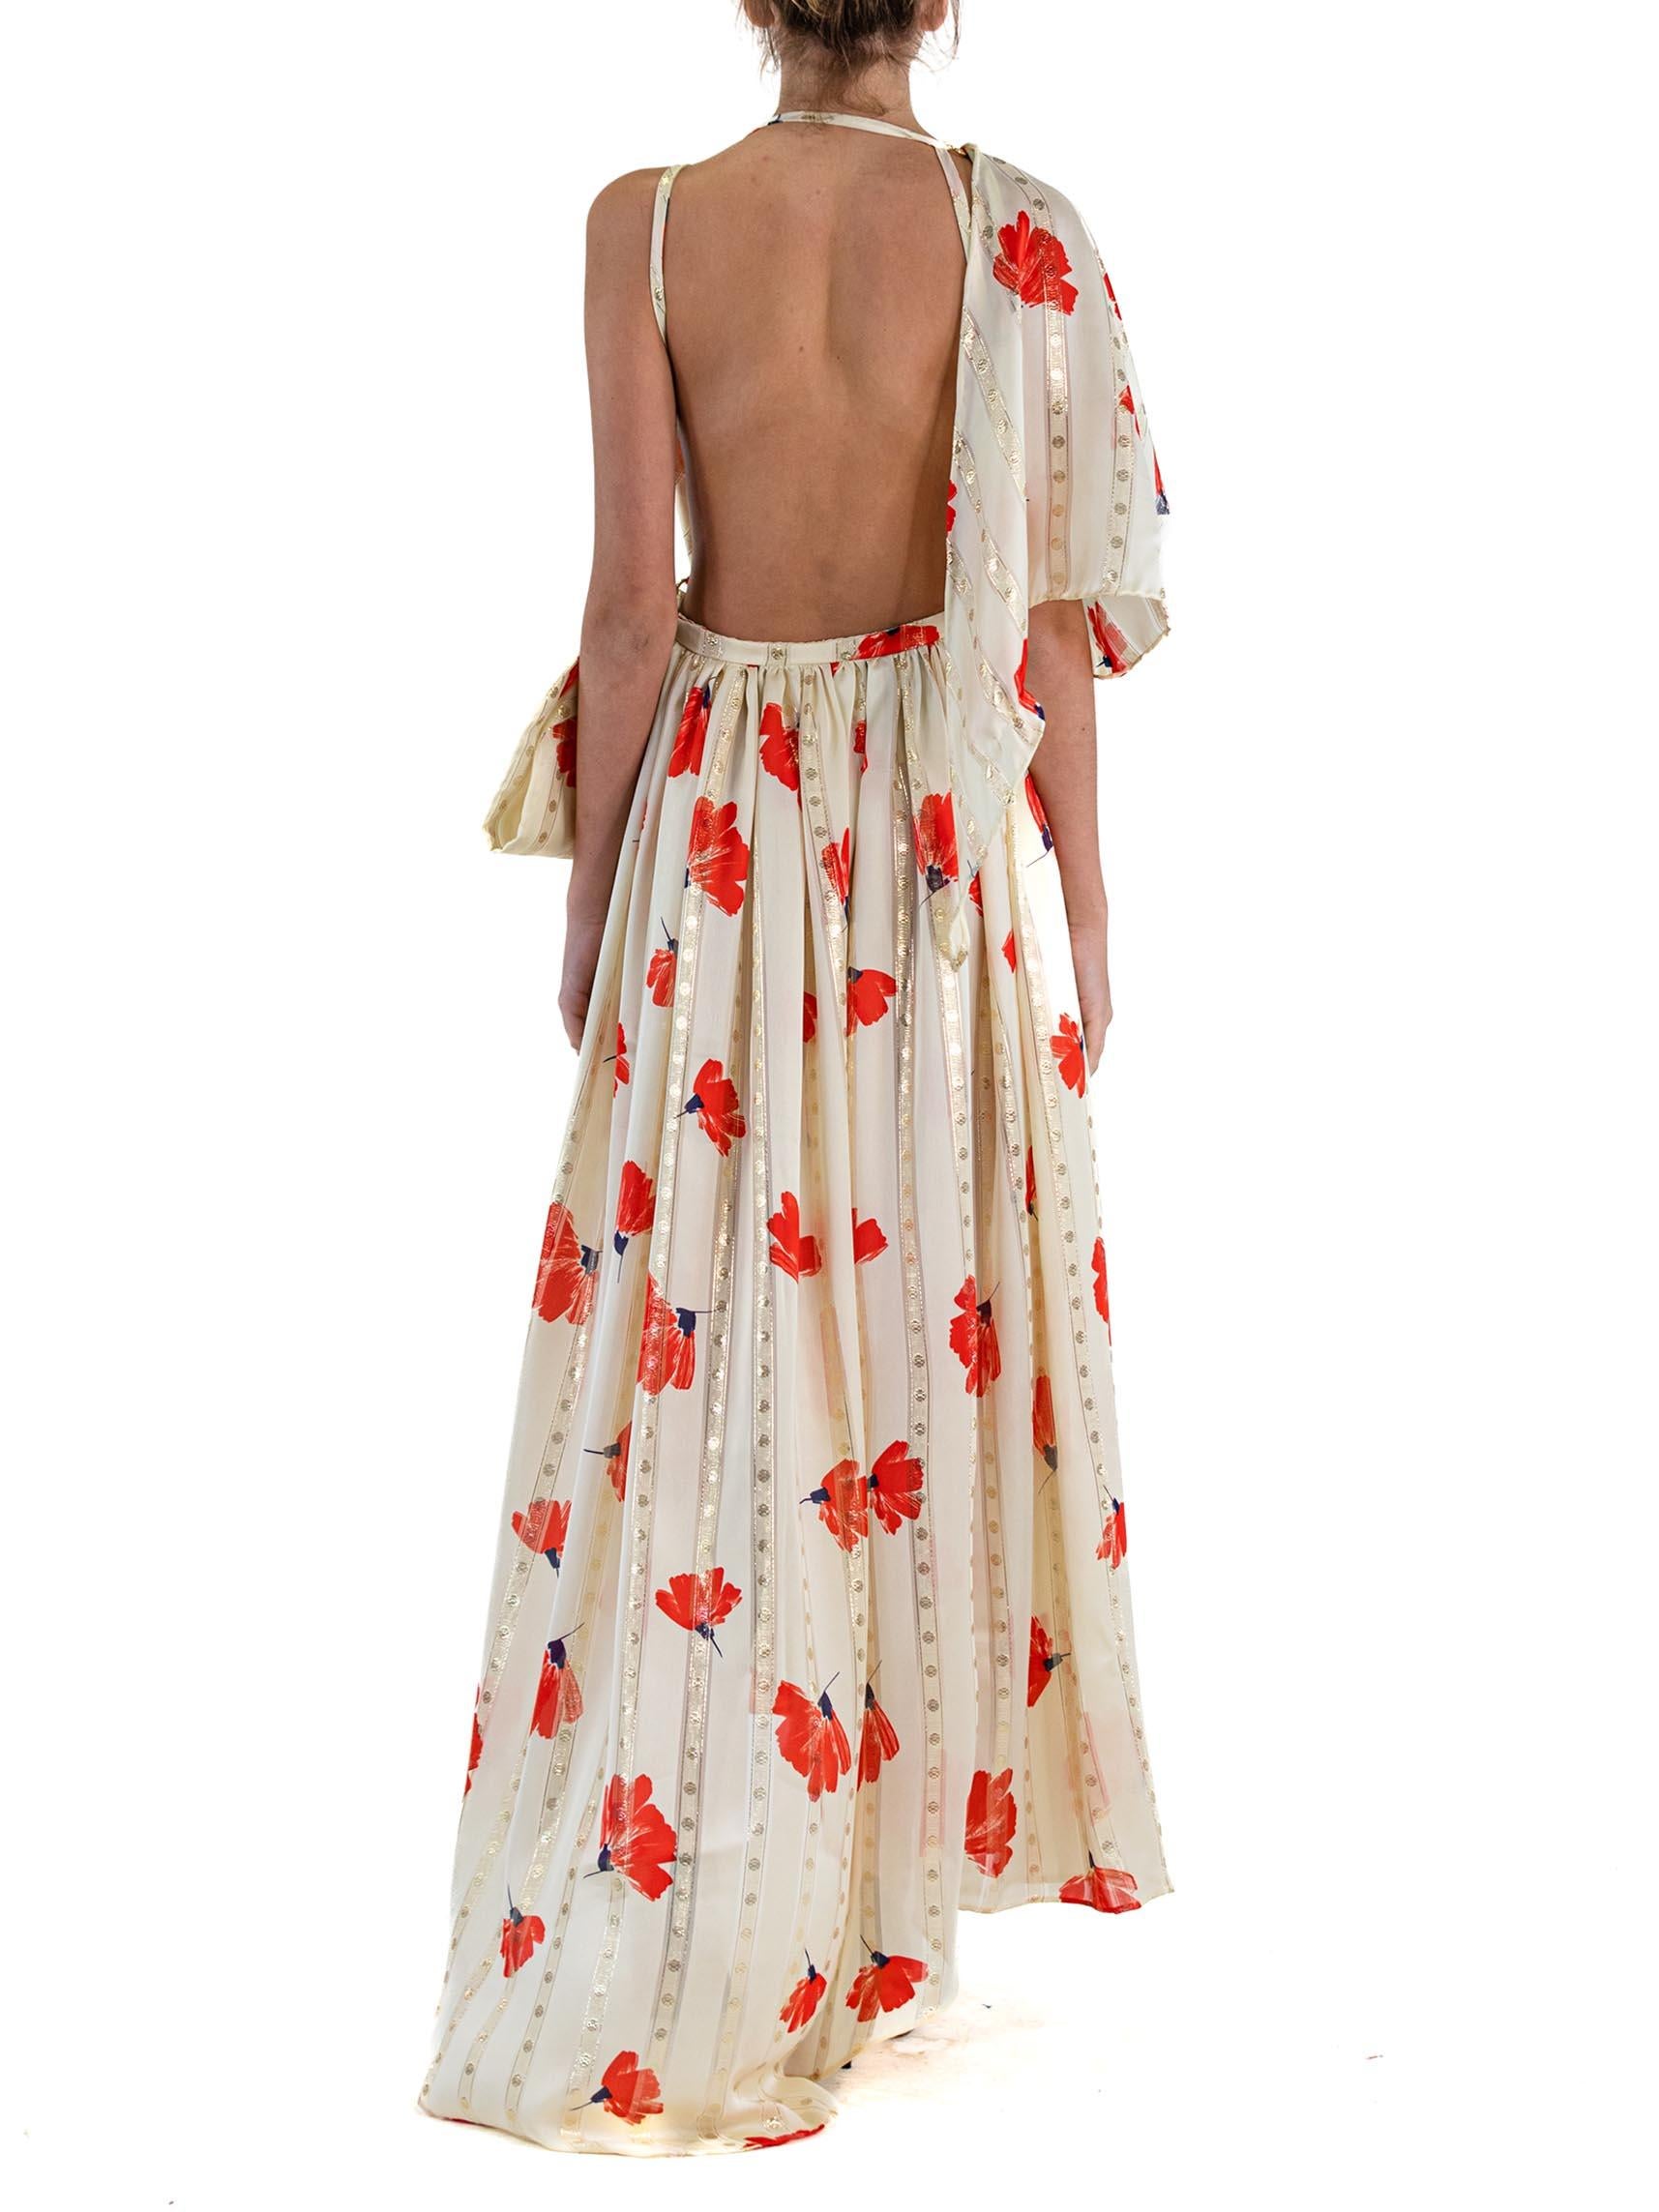 MORPHEW ATELIER Cream & Red Poly/Lurex Lamé Cut-Out Gown With High Slit Bow For Sale 3